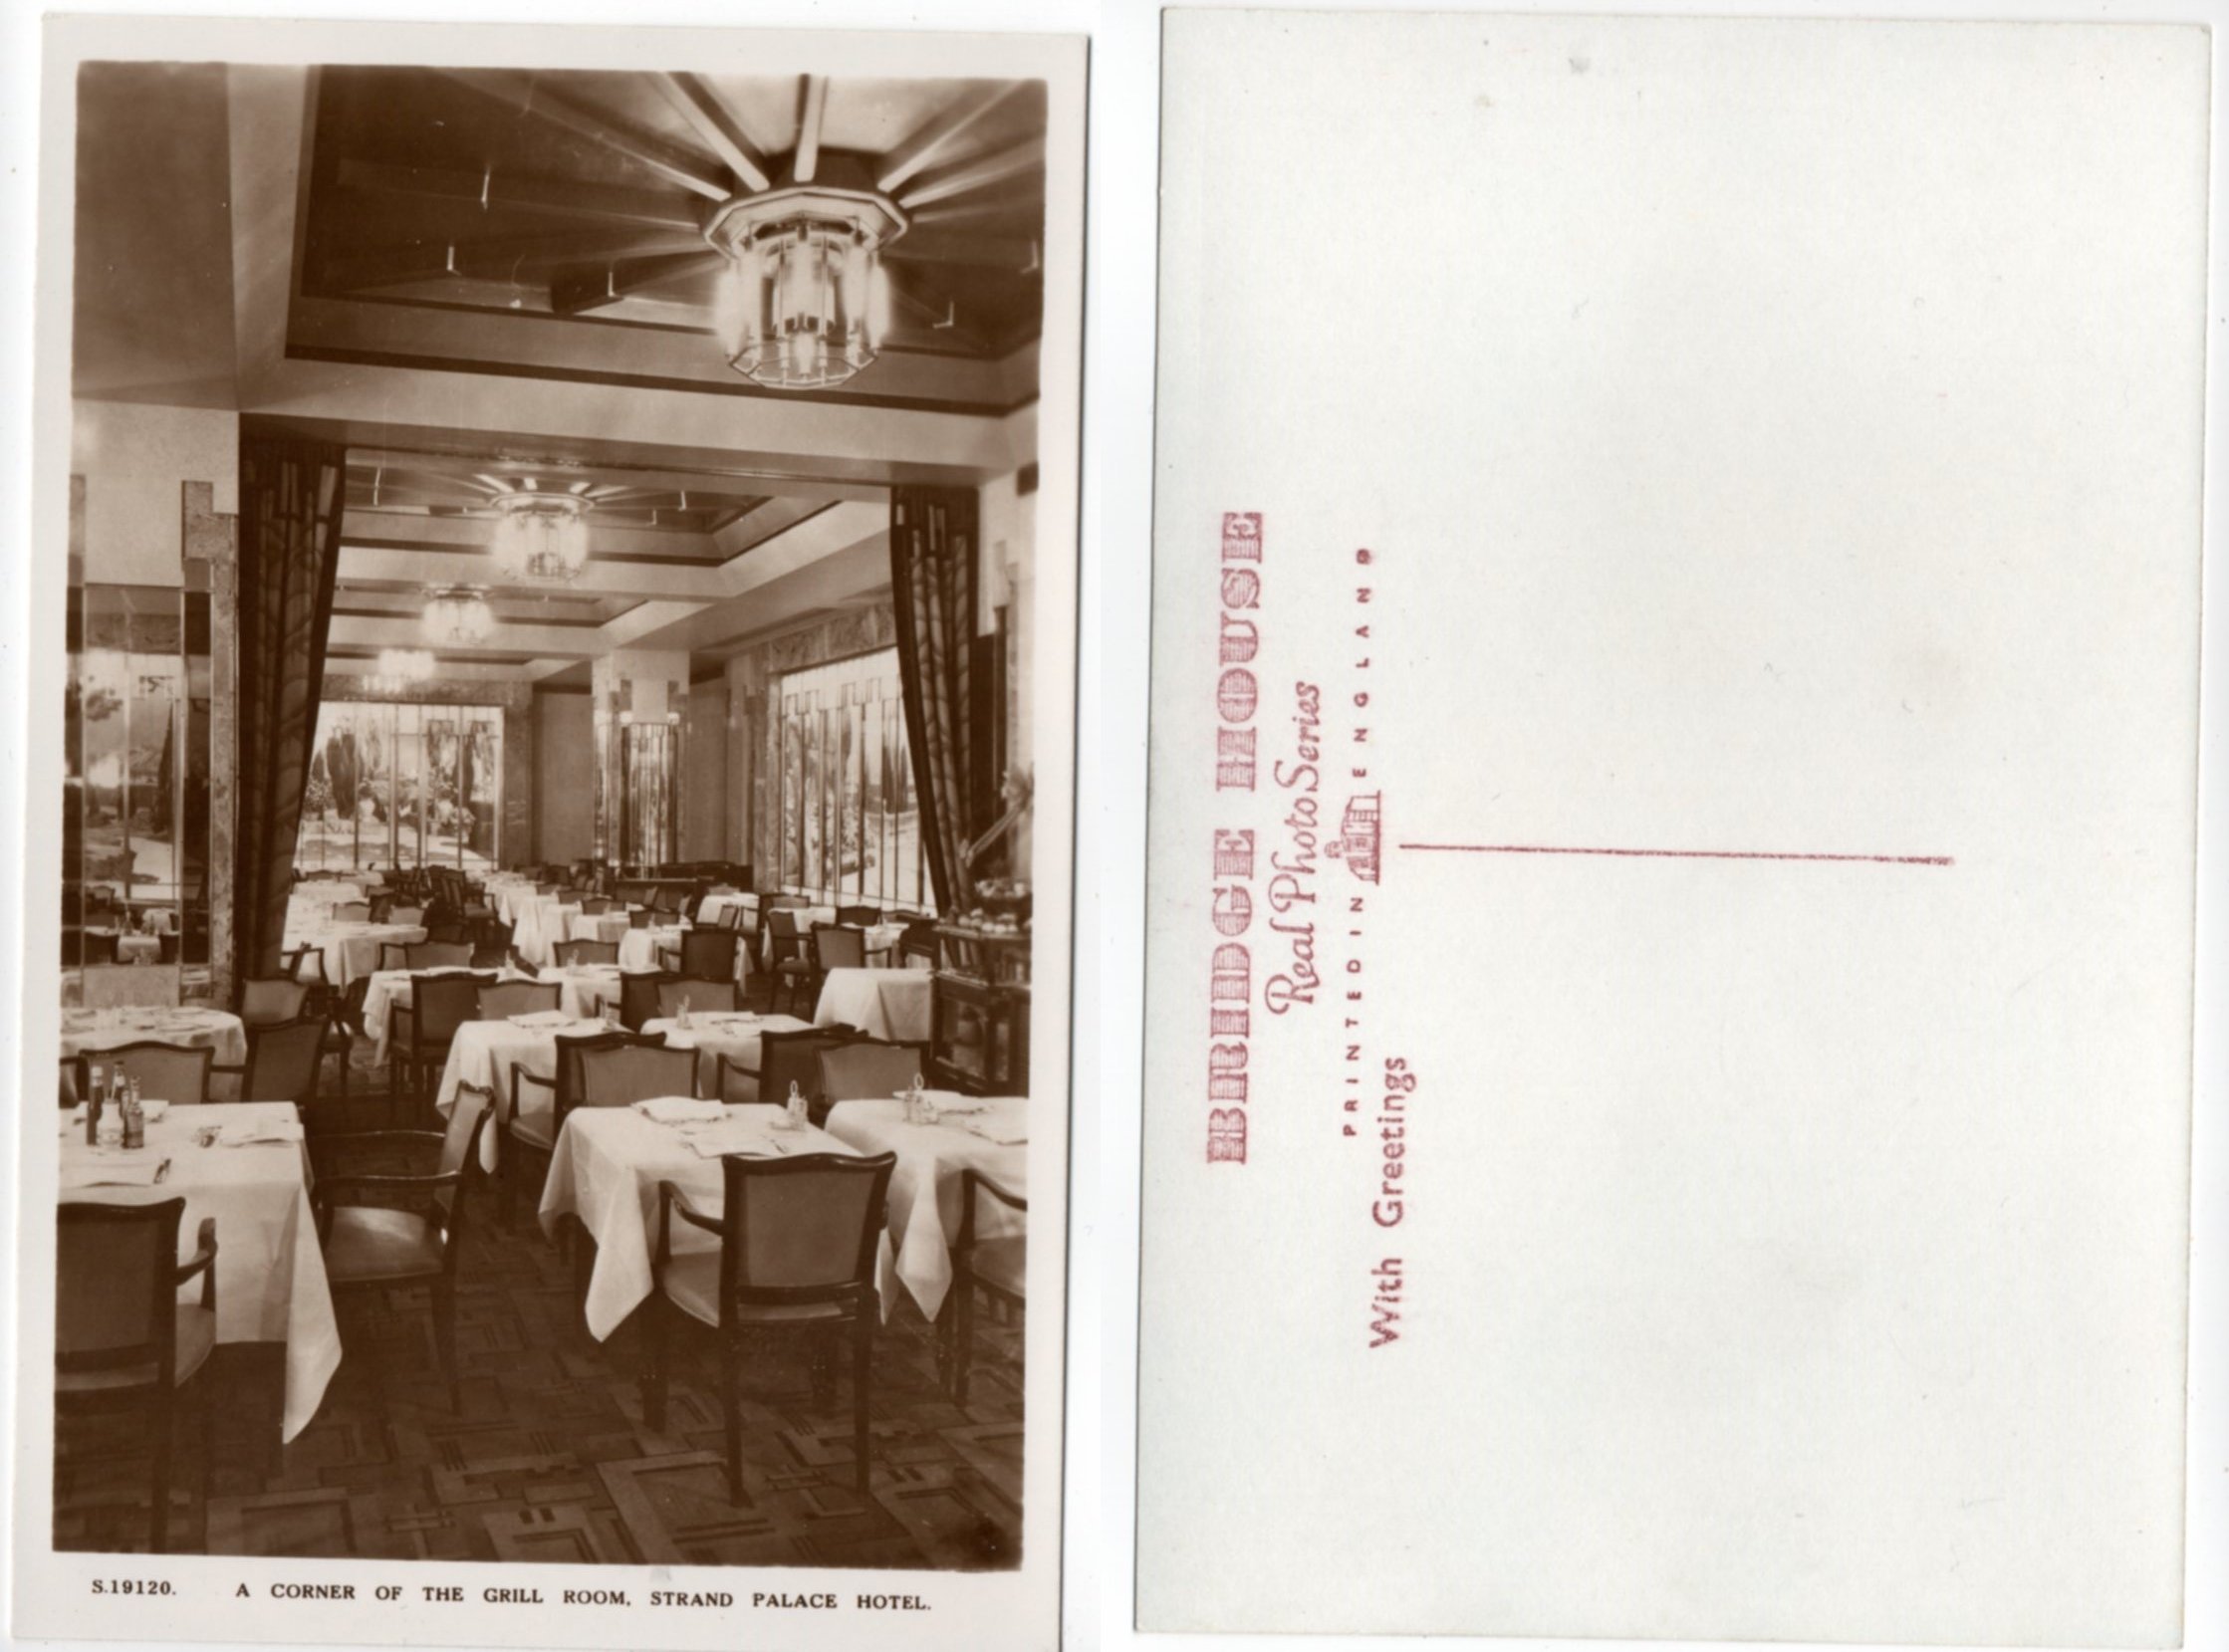 A Corner Of The Grill Room Strand Palace Hotel PW106.jpg  by whitetaylor